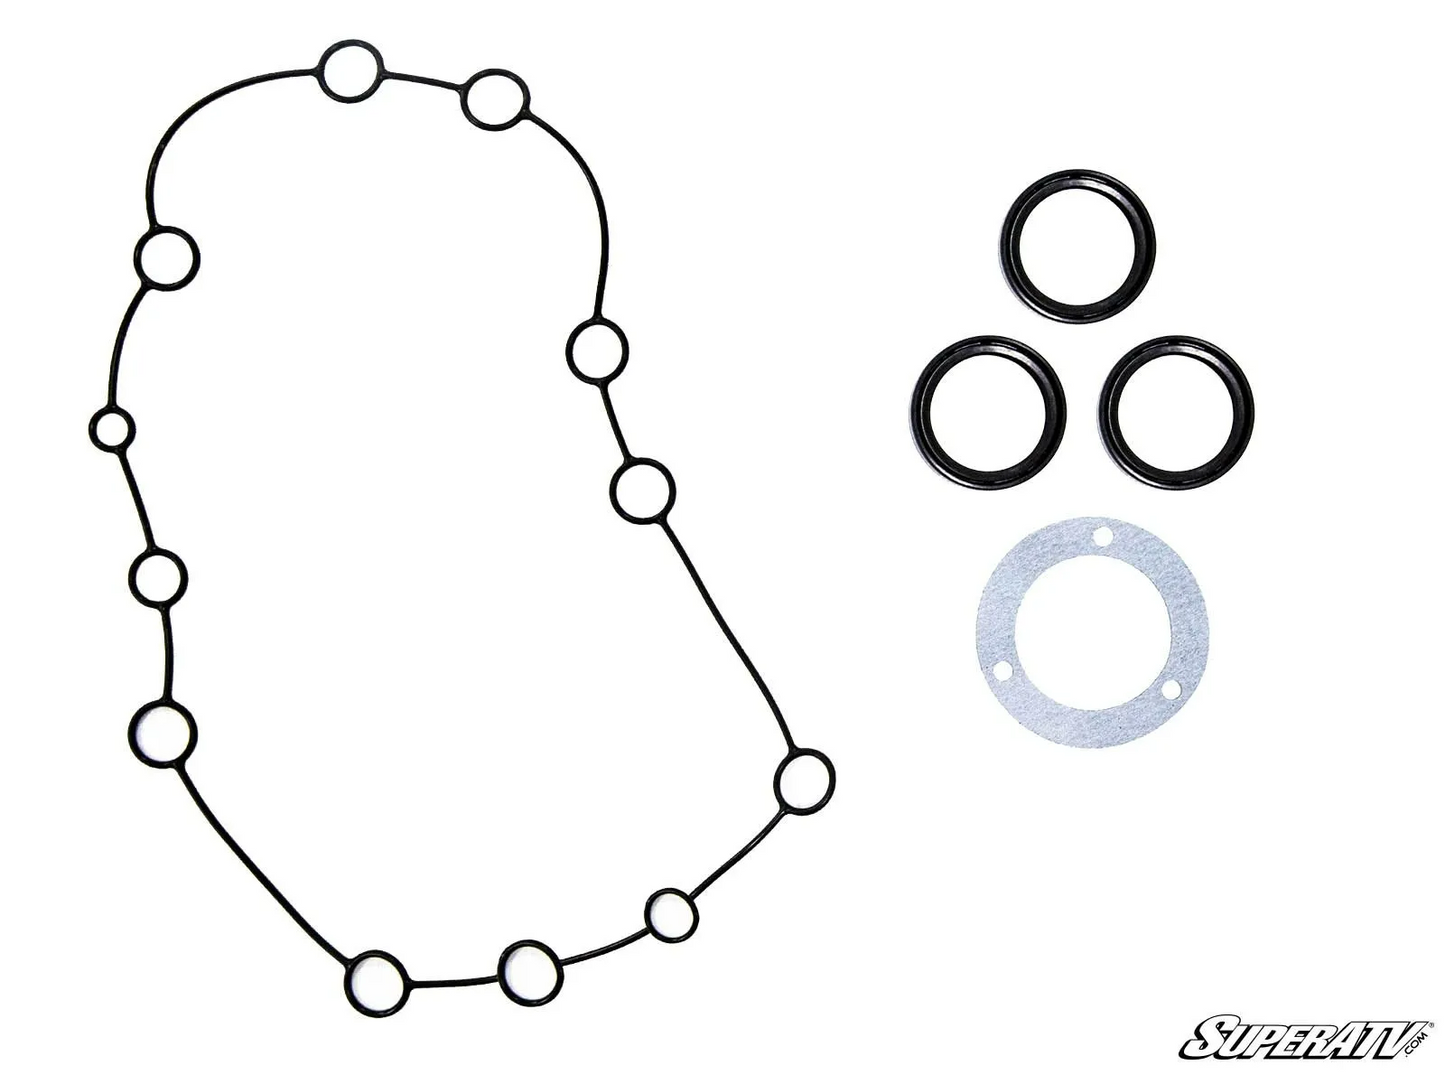 SuperATV 8 Inch Portal Gear Lift Seal And Bearing Replacement Kit